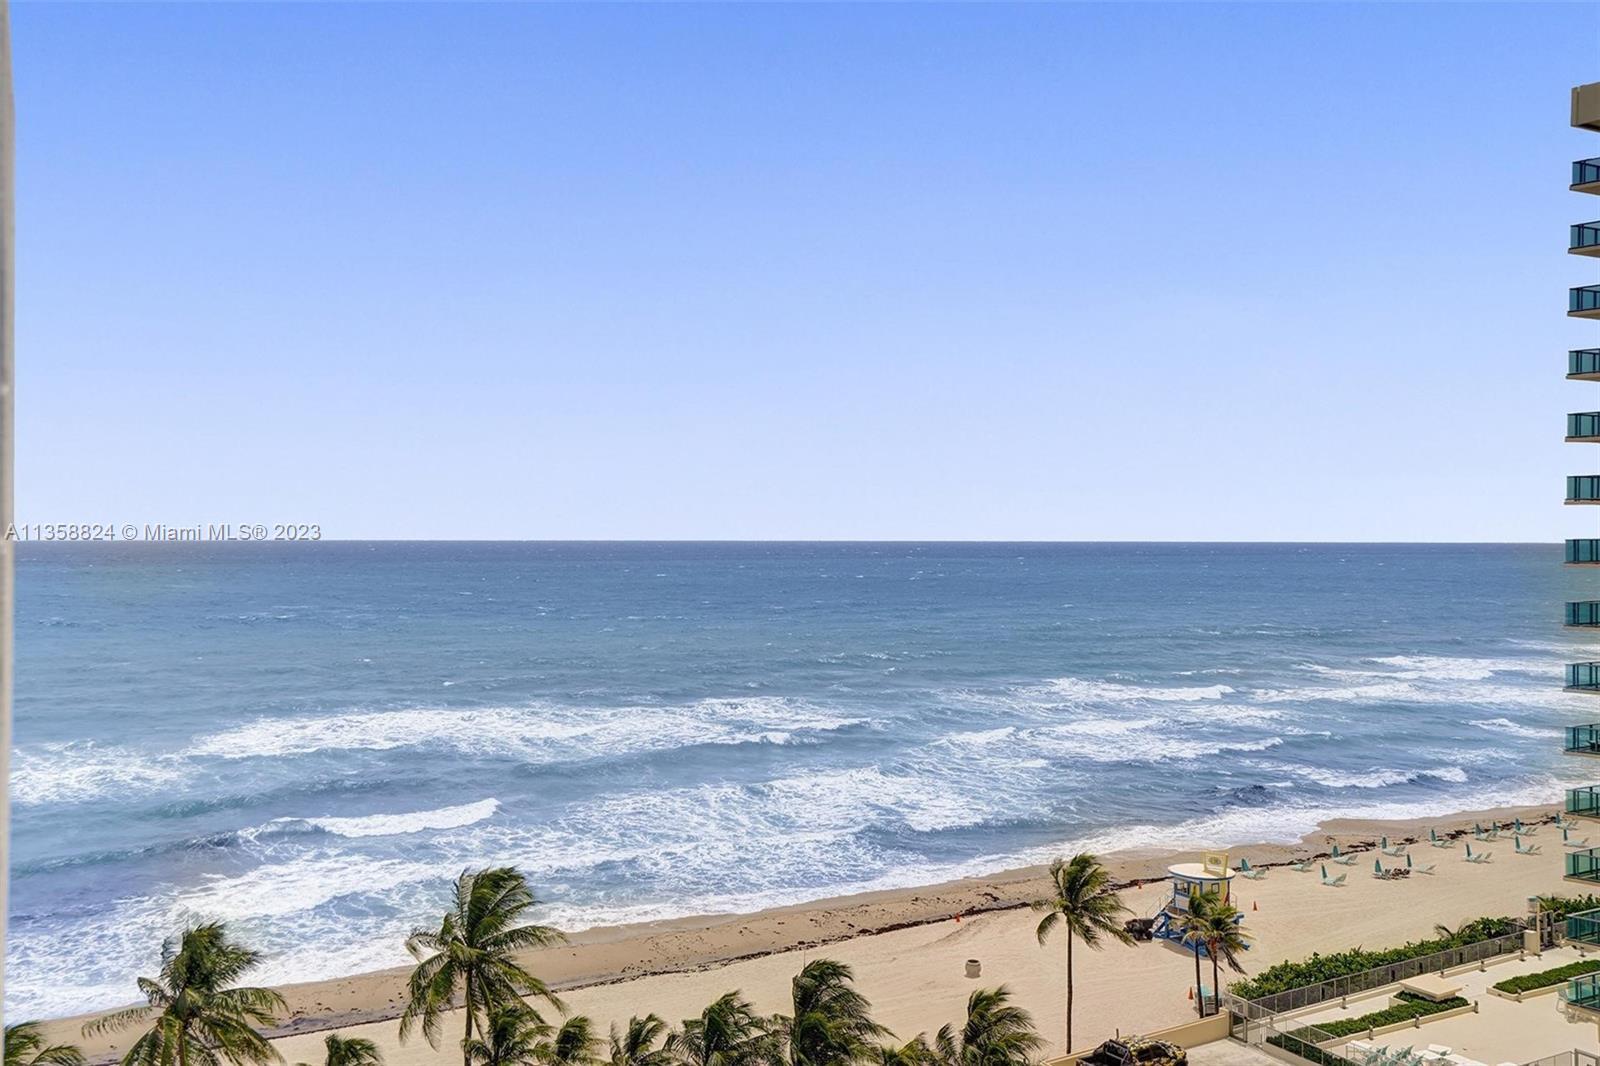 This oceanfront condo features amazing views of the ocean & city from all rooms. Many NEW updates in